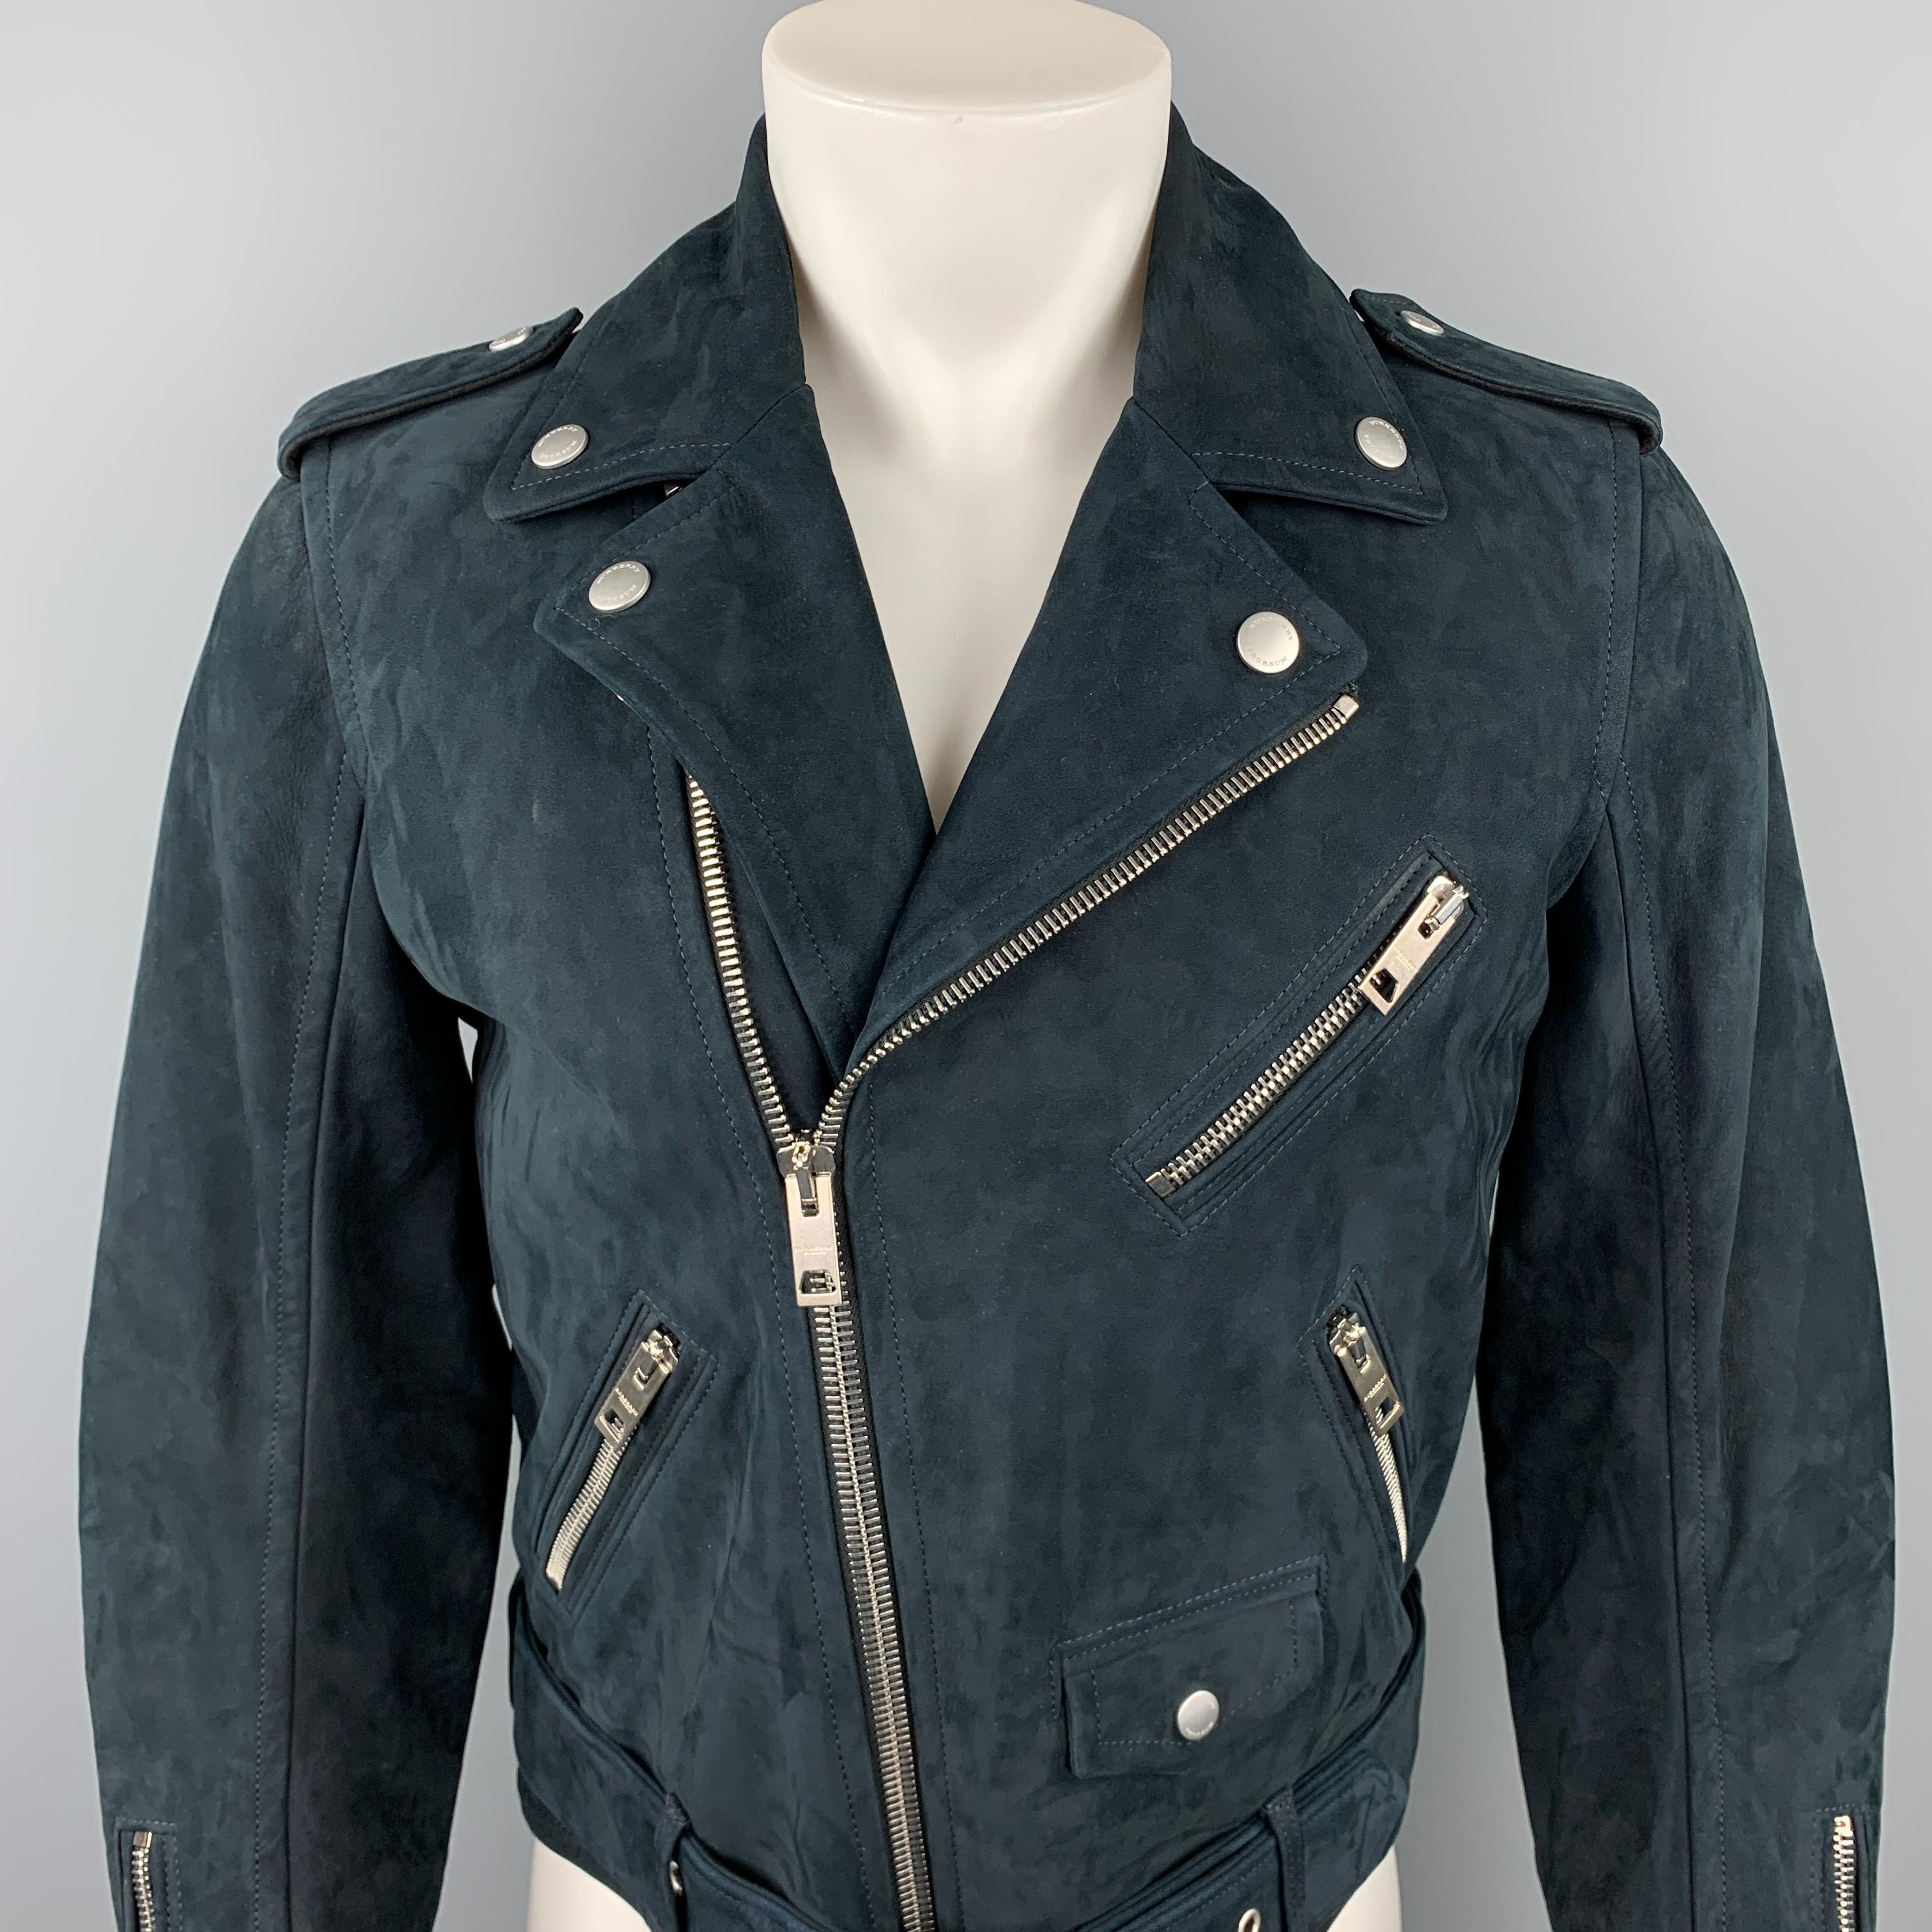 BURBERRY PRORSUM jacket comes in a navy nubuck suede with a red quilted liner featuring a biker style, zipper pockets, epaulettes, quilted sleeves, snap button details, belted, and a zip up closure. Made in Italy.

New With Tags. 
Marked: IT